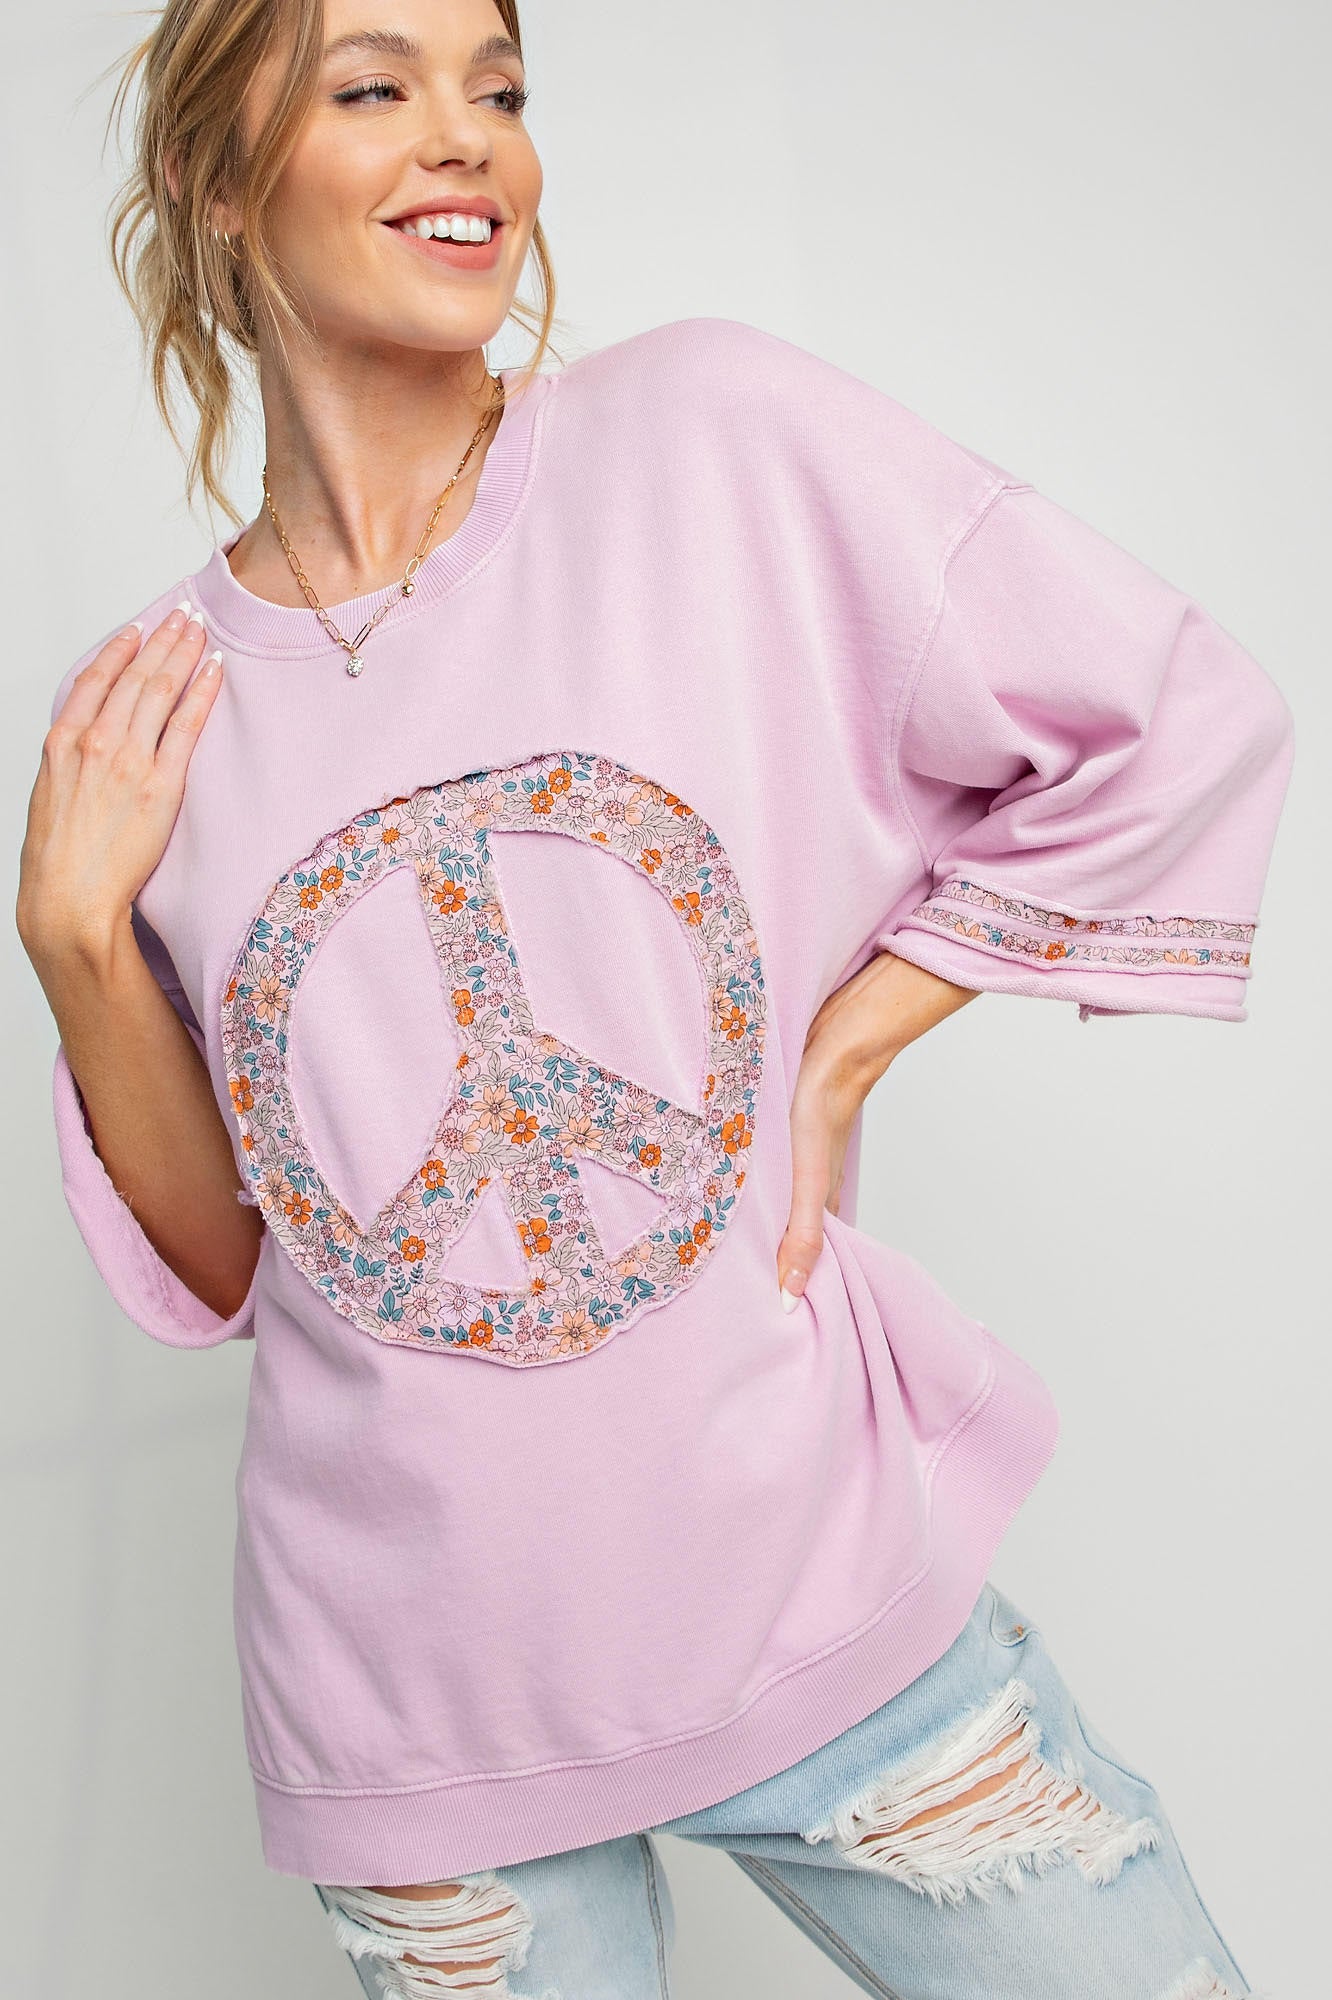 Cici Half Sleeve Peace Sign Top in Pink